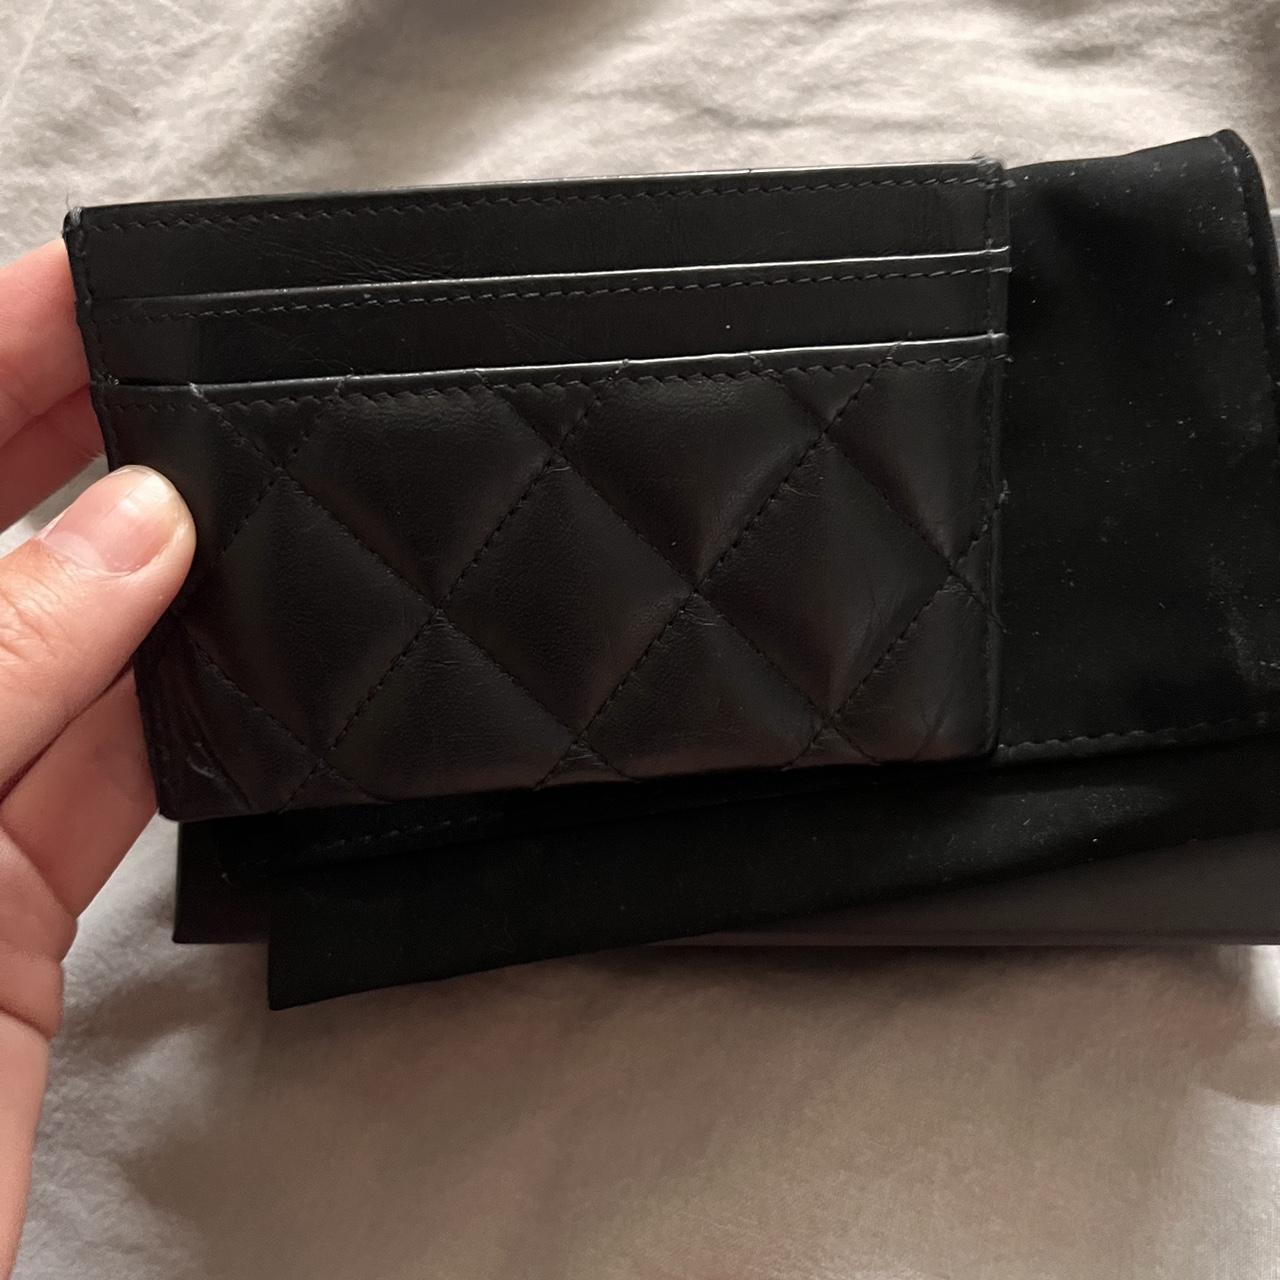 Chanel card holder. Black and burgundy leather. Just